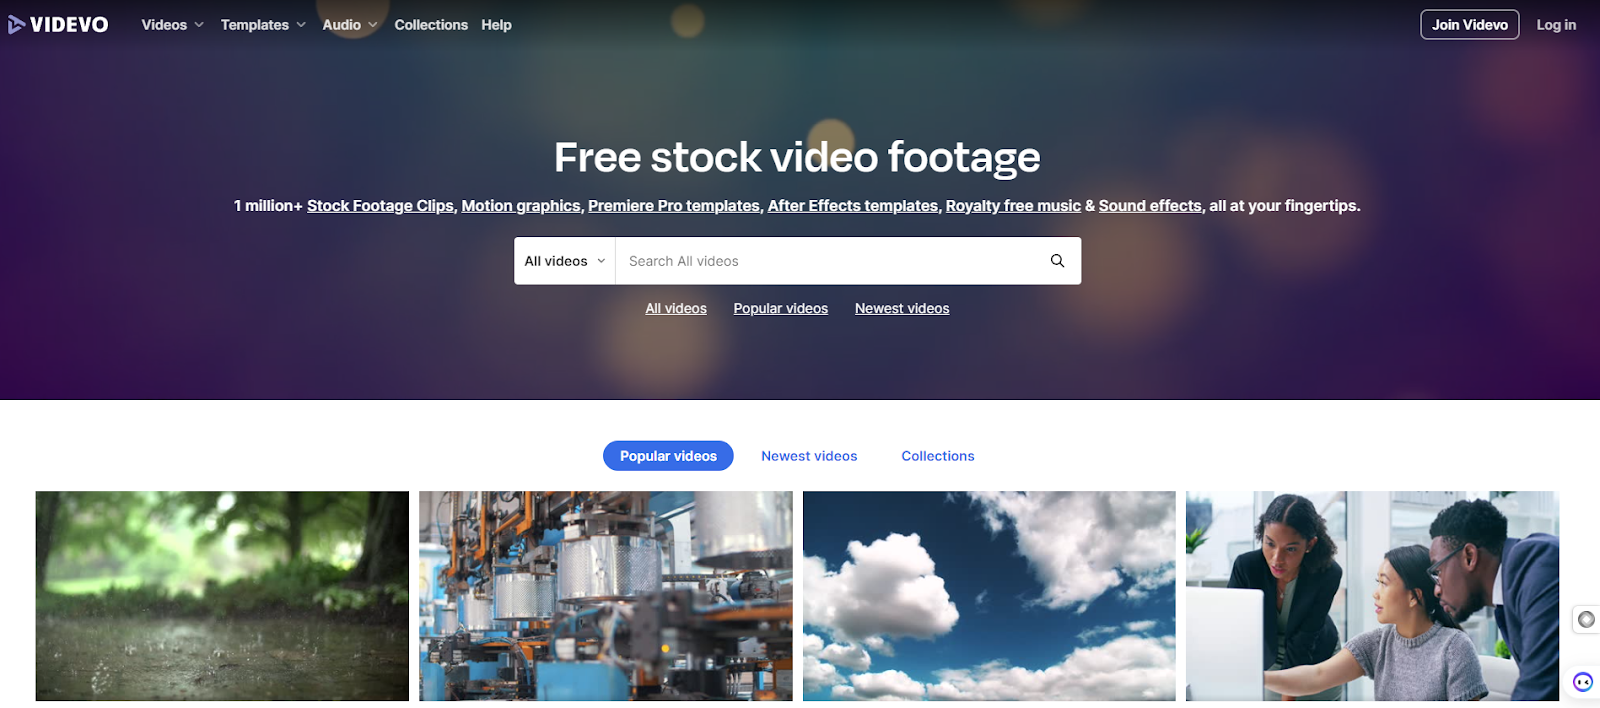 Videvo - Free Stock Videos & Footage in Various Collections